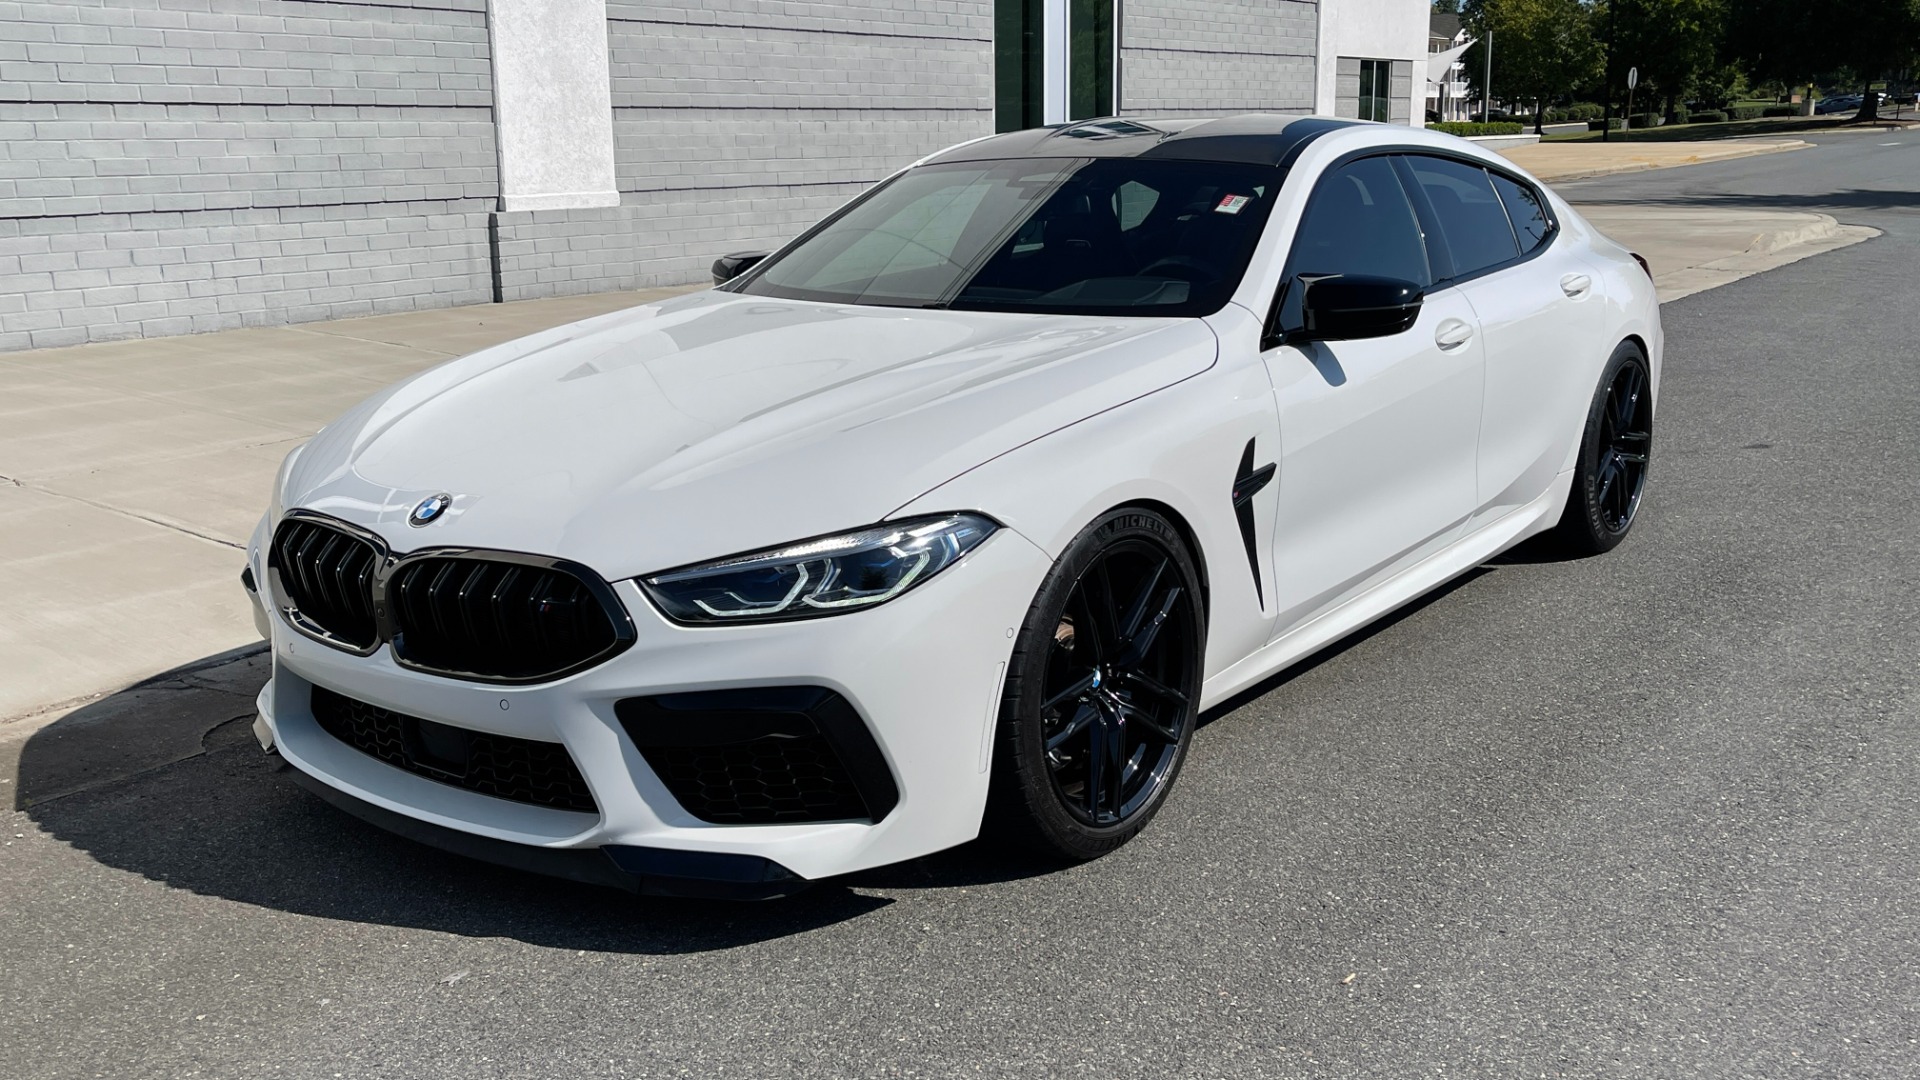 Used 2020 BMW M8 COMPETITON / TWIN TURBO / KW V3 SUSPENSION / FRONT LIFT / PPF / CERAMIC COA for sale $114,999 at Formula Imports in Charlotte NC 28227 2